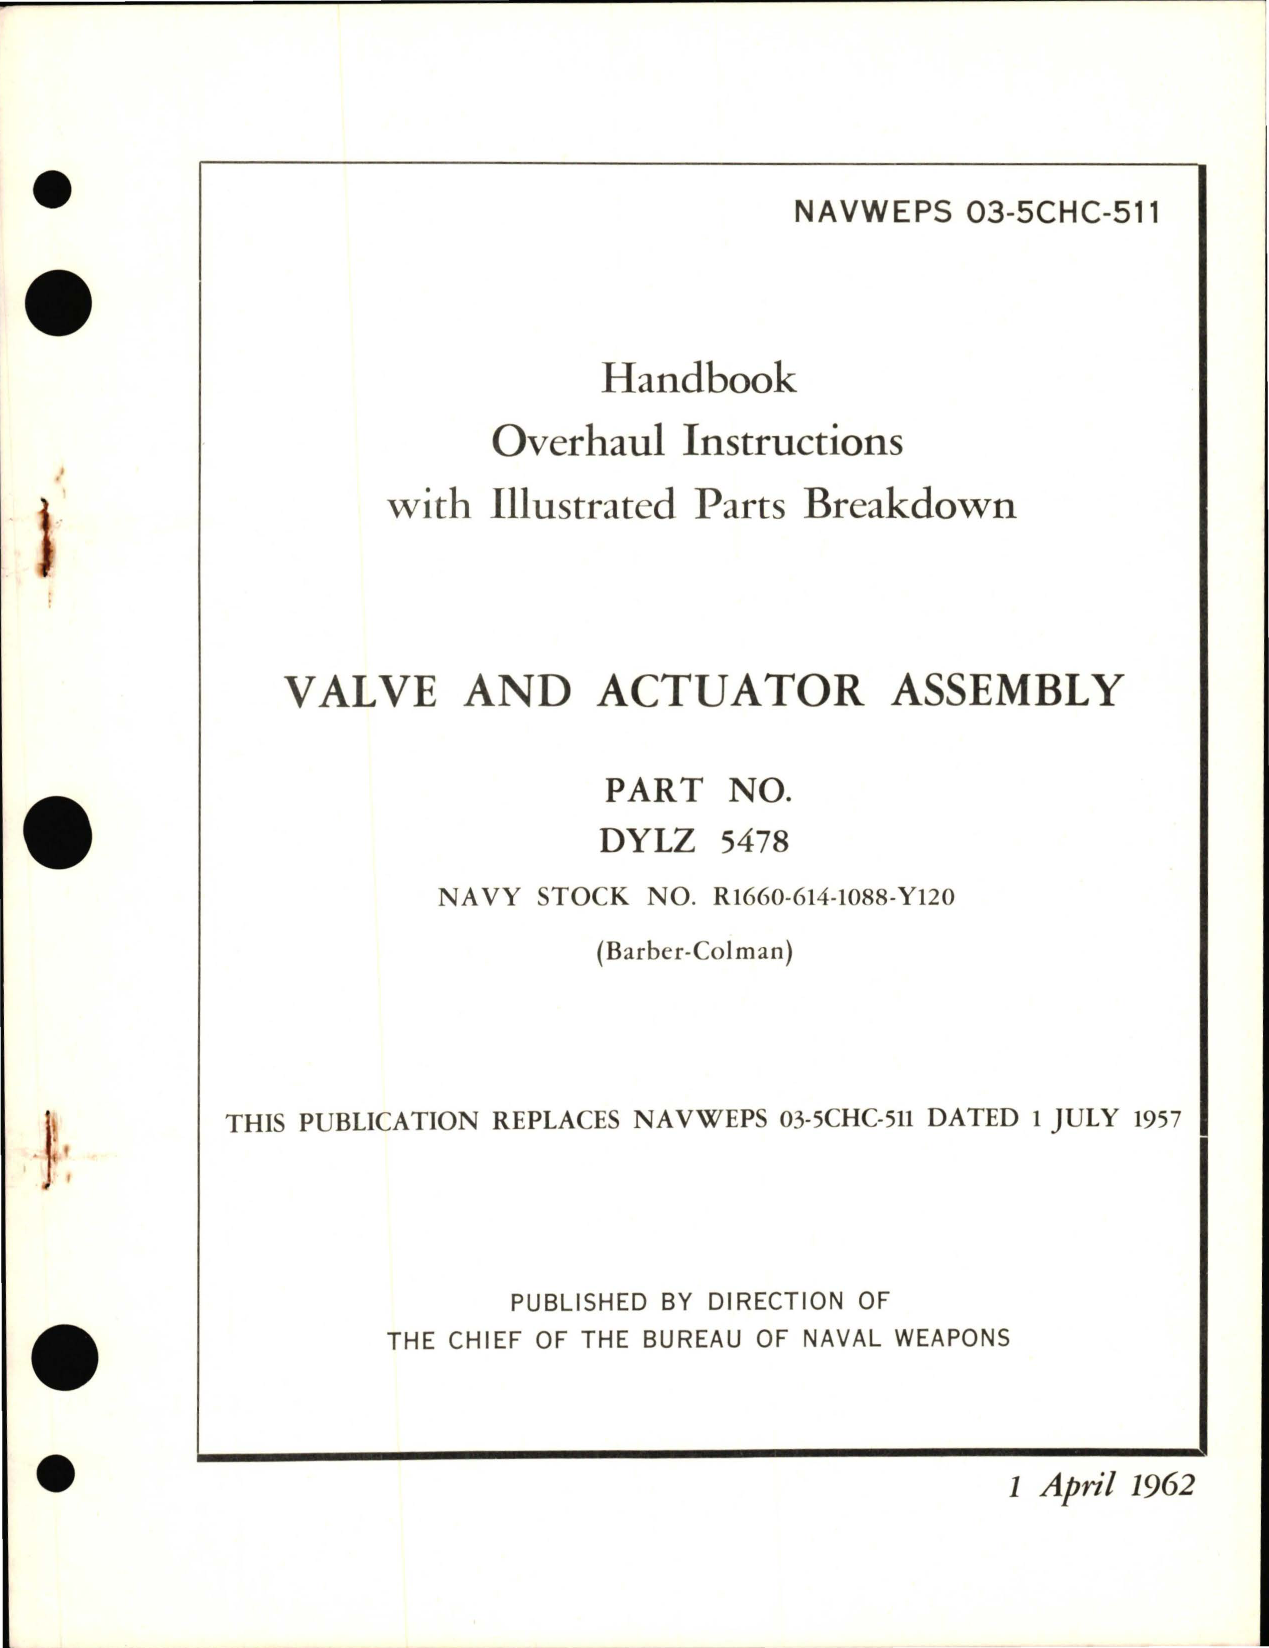 Sample page 1 from AirCorps Library document: Overhaul Instructions with Illustrated Parts Breakdown for Valve and Actuator Assembly - Part DYLZ 5478